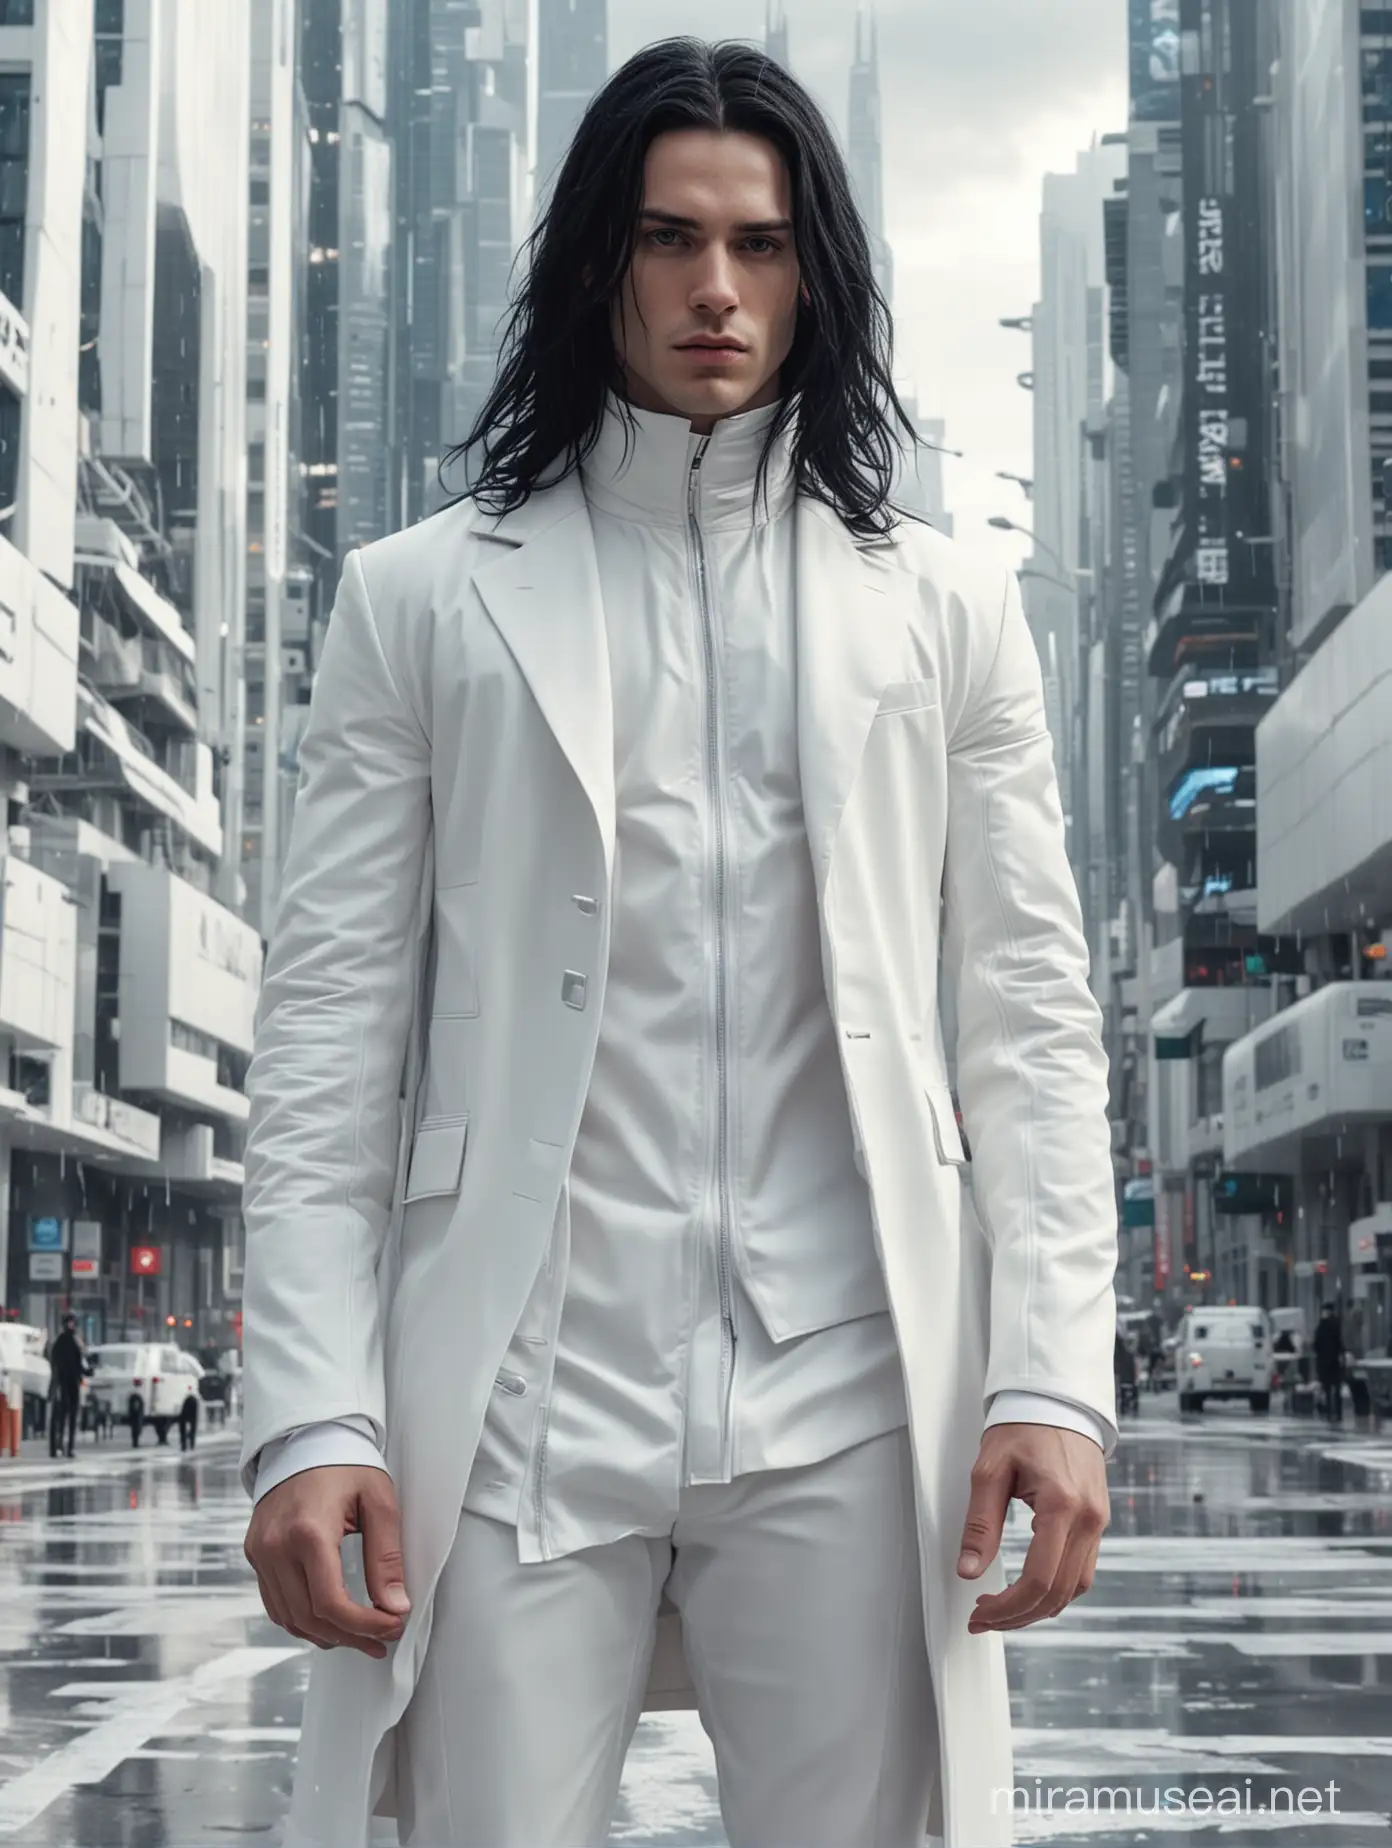 Athletic Young Man in White Suit against Futuristic Cityscape